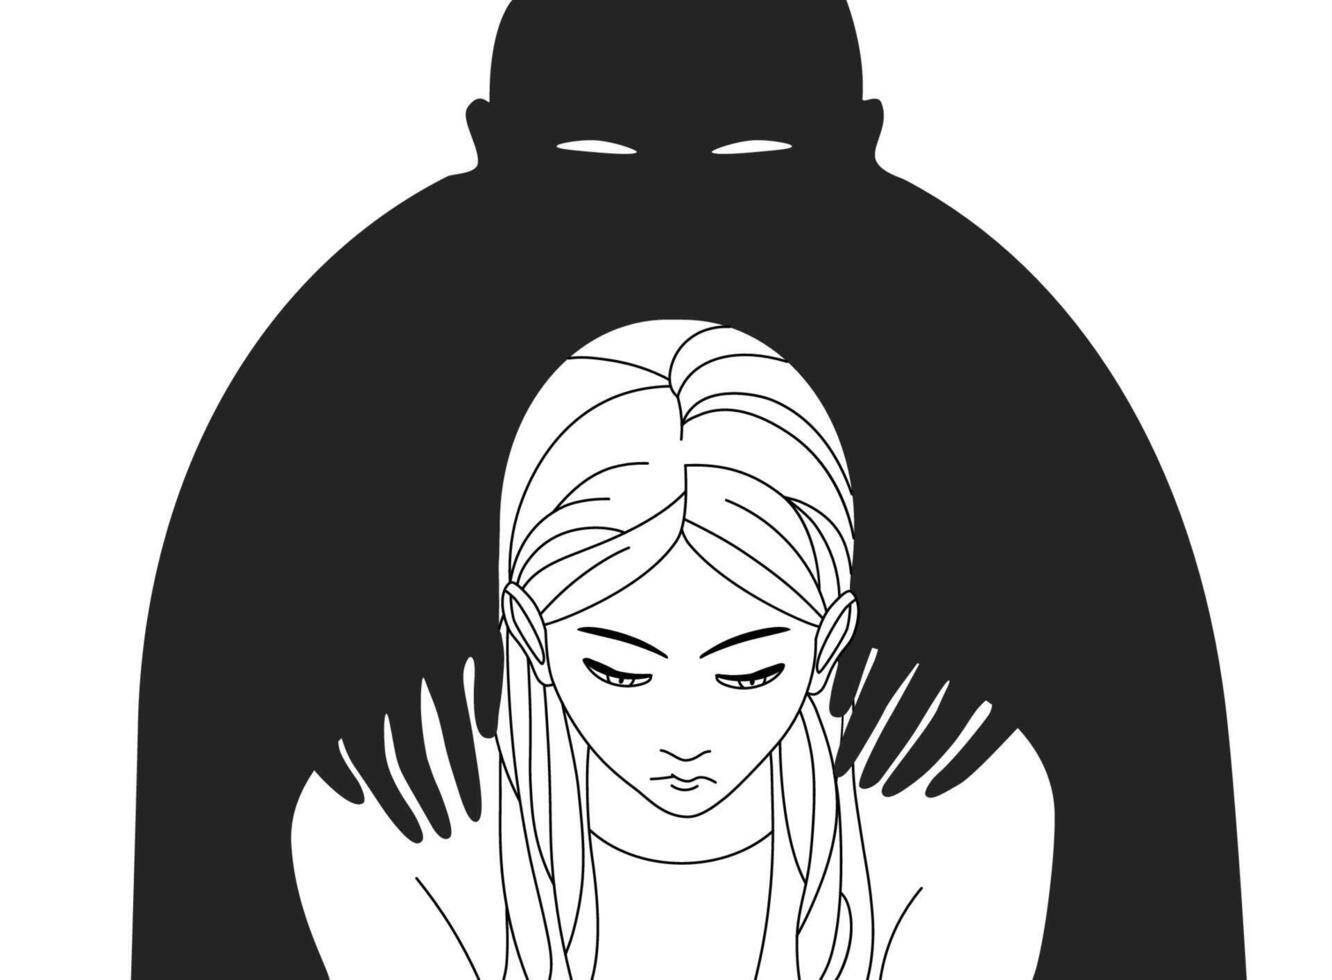 Depressed woman with lowered head and black silhouette of man standing behind and putting his hands on her shoulders. Concept of depression or mental disorder. Monochrome illustration. vector